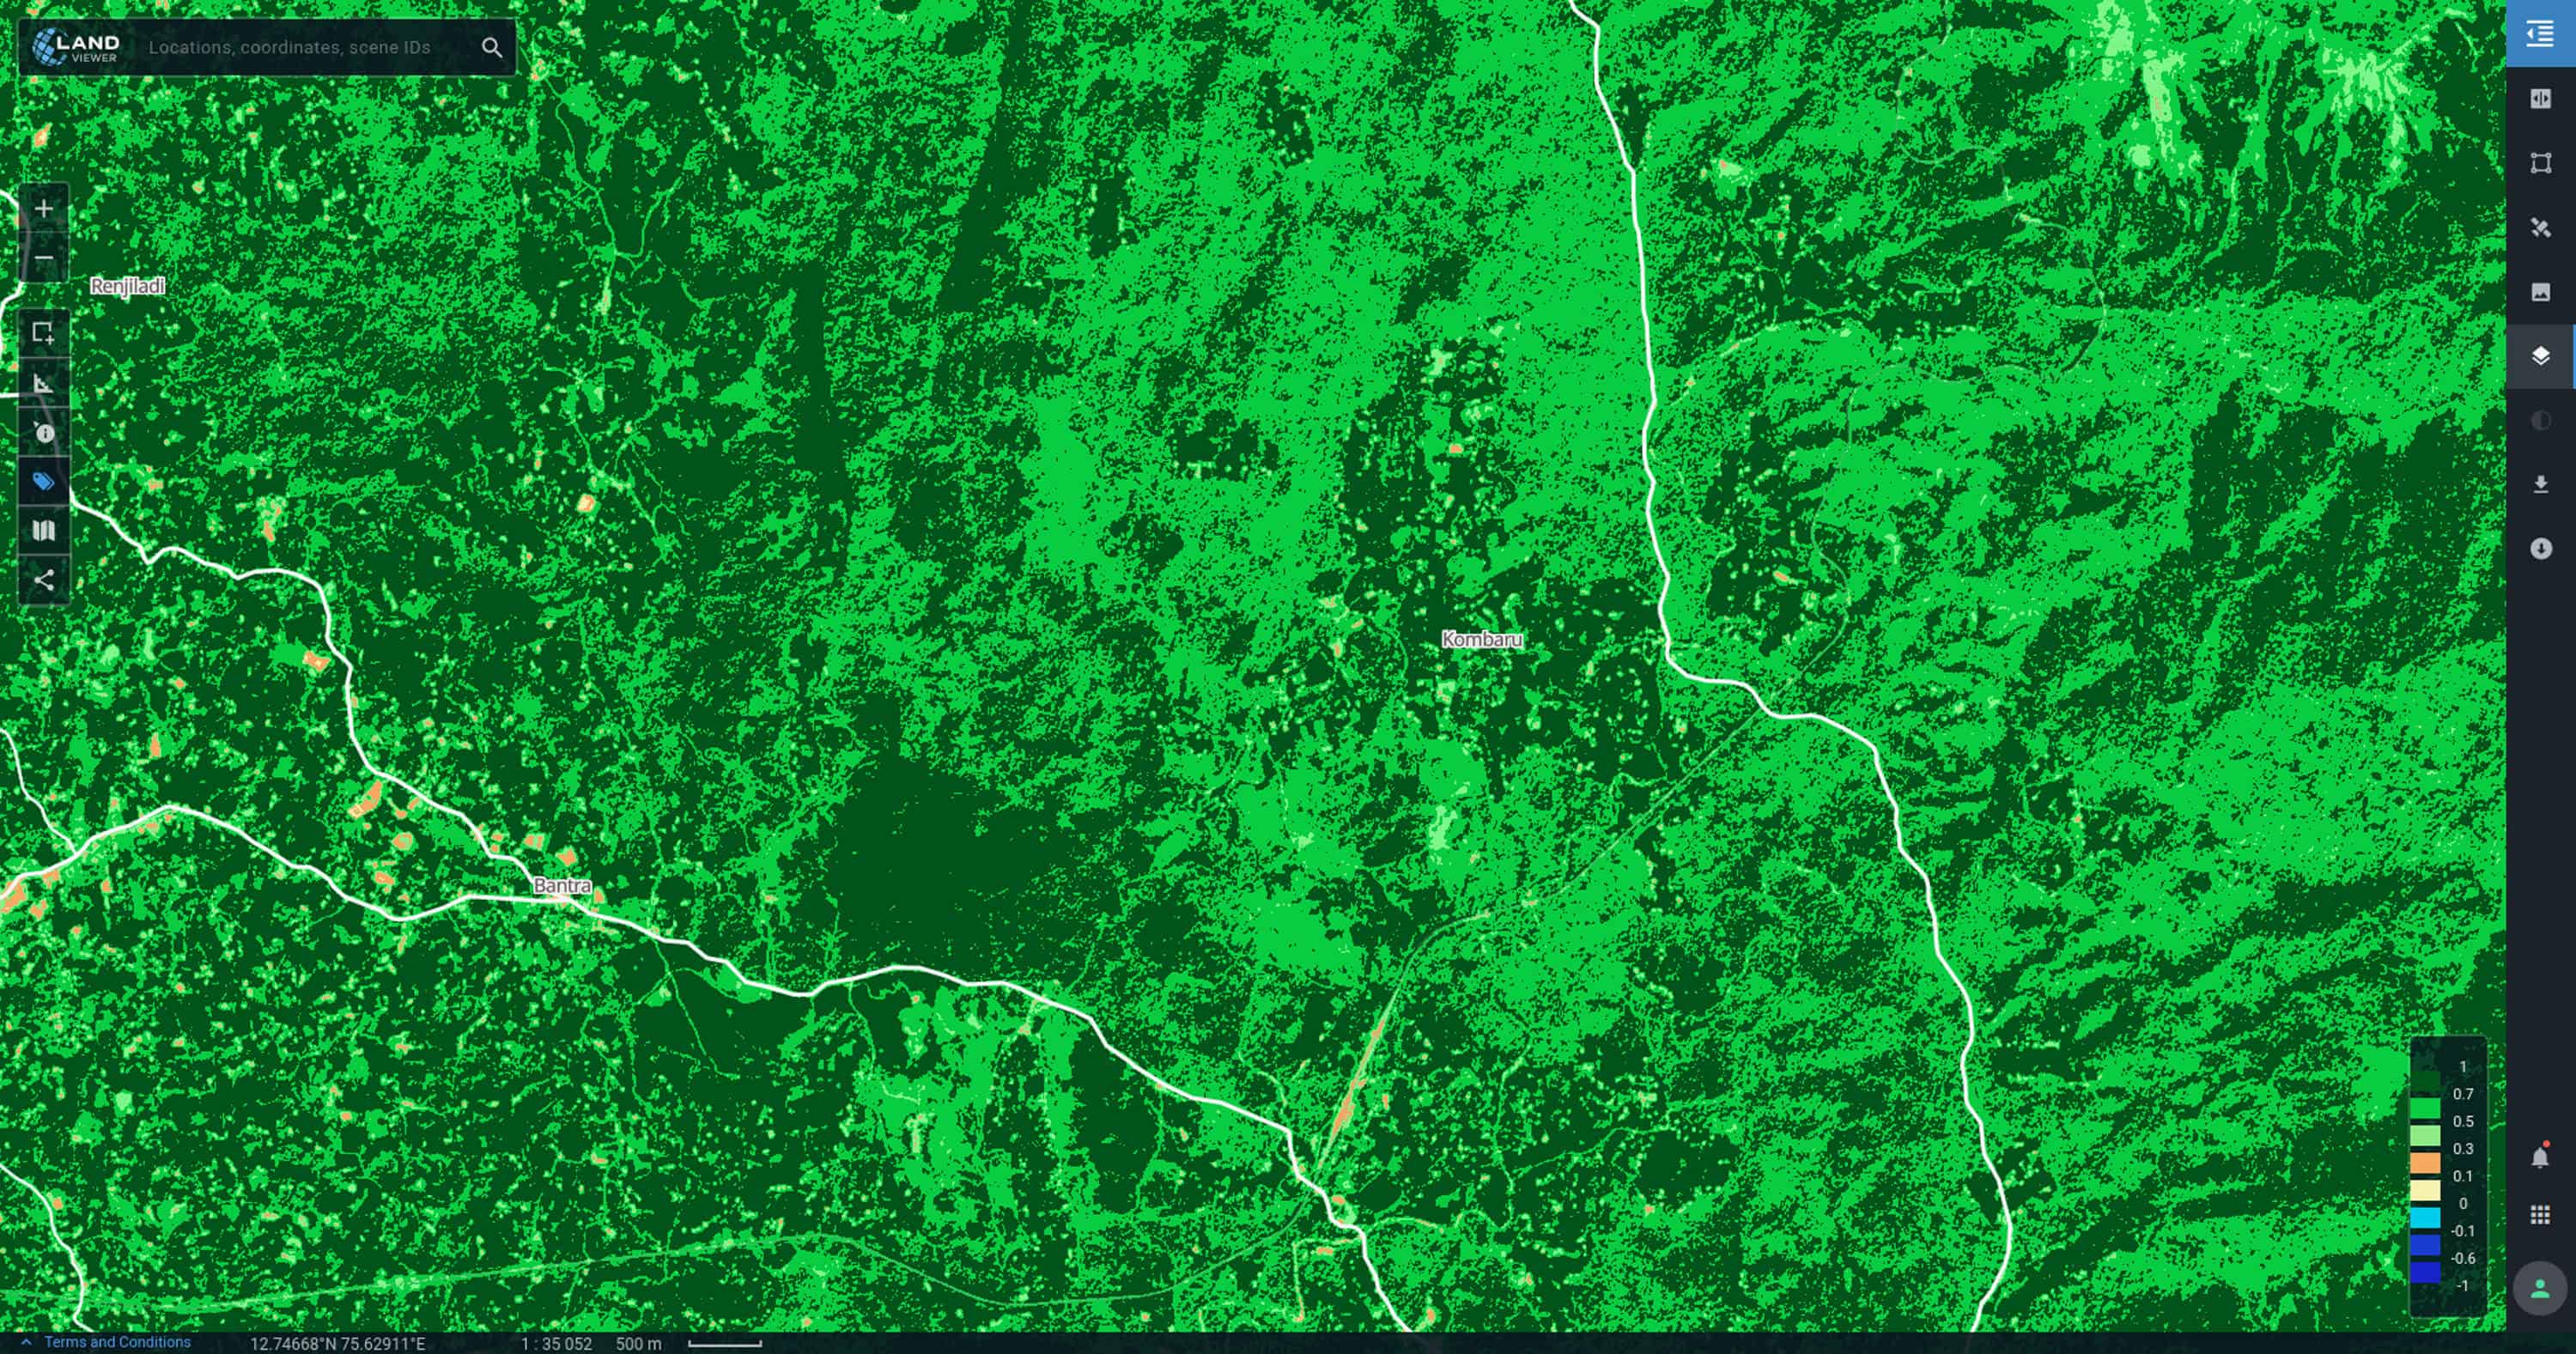 Figure 1. NDVI image of Bantra and Kombaru forest vegetation in 2015.